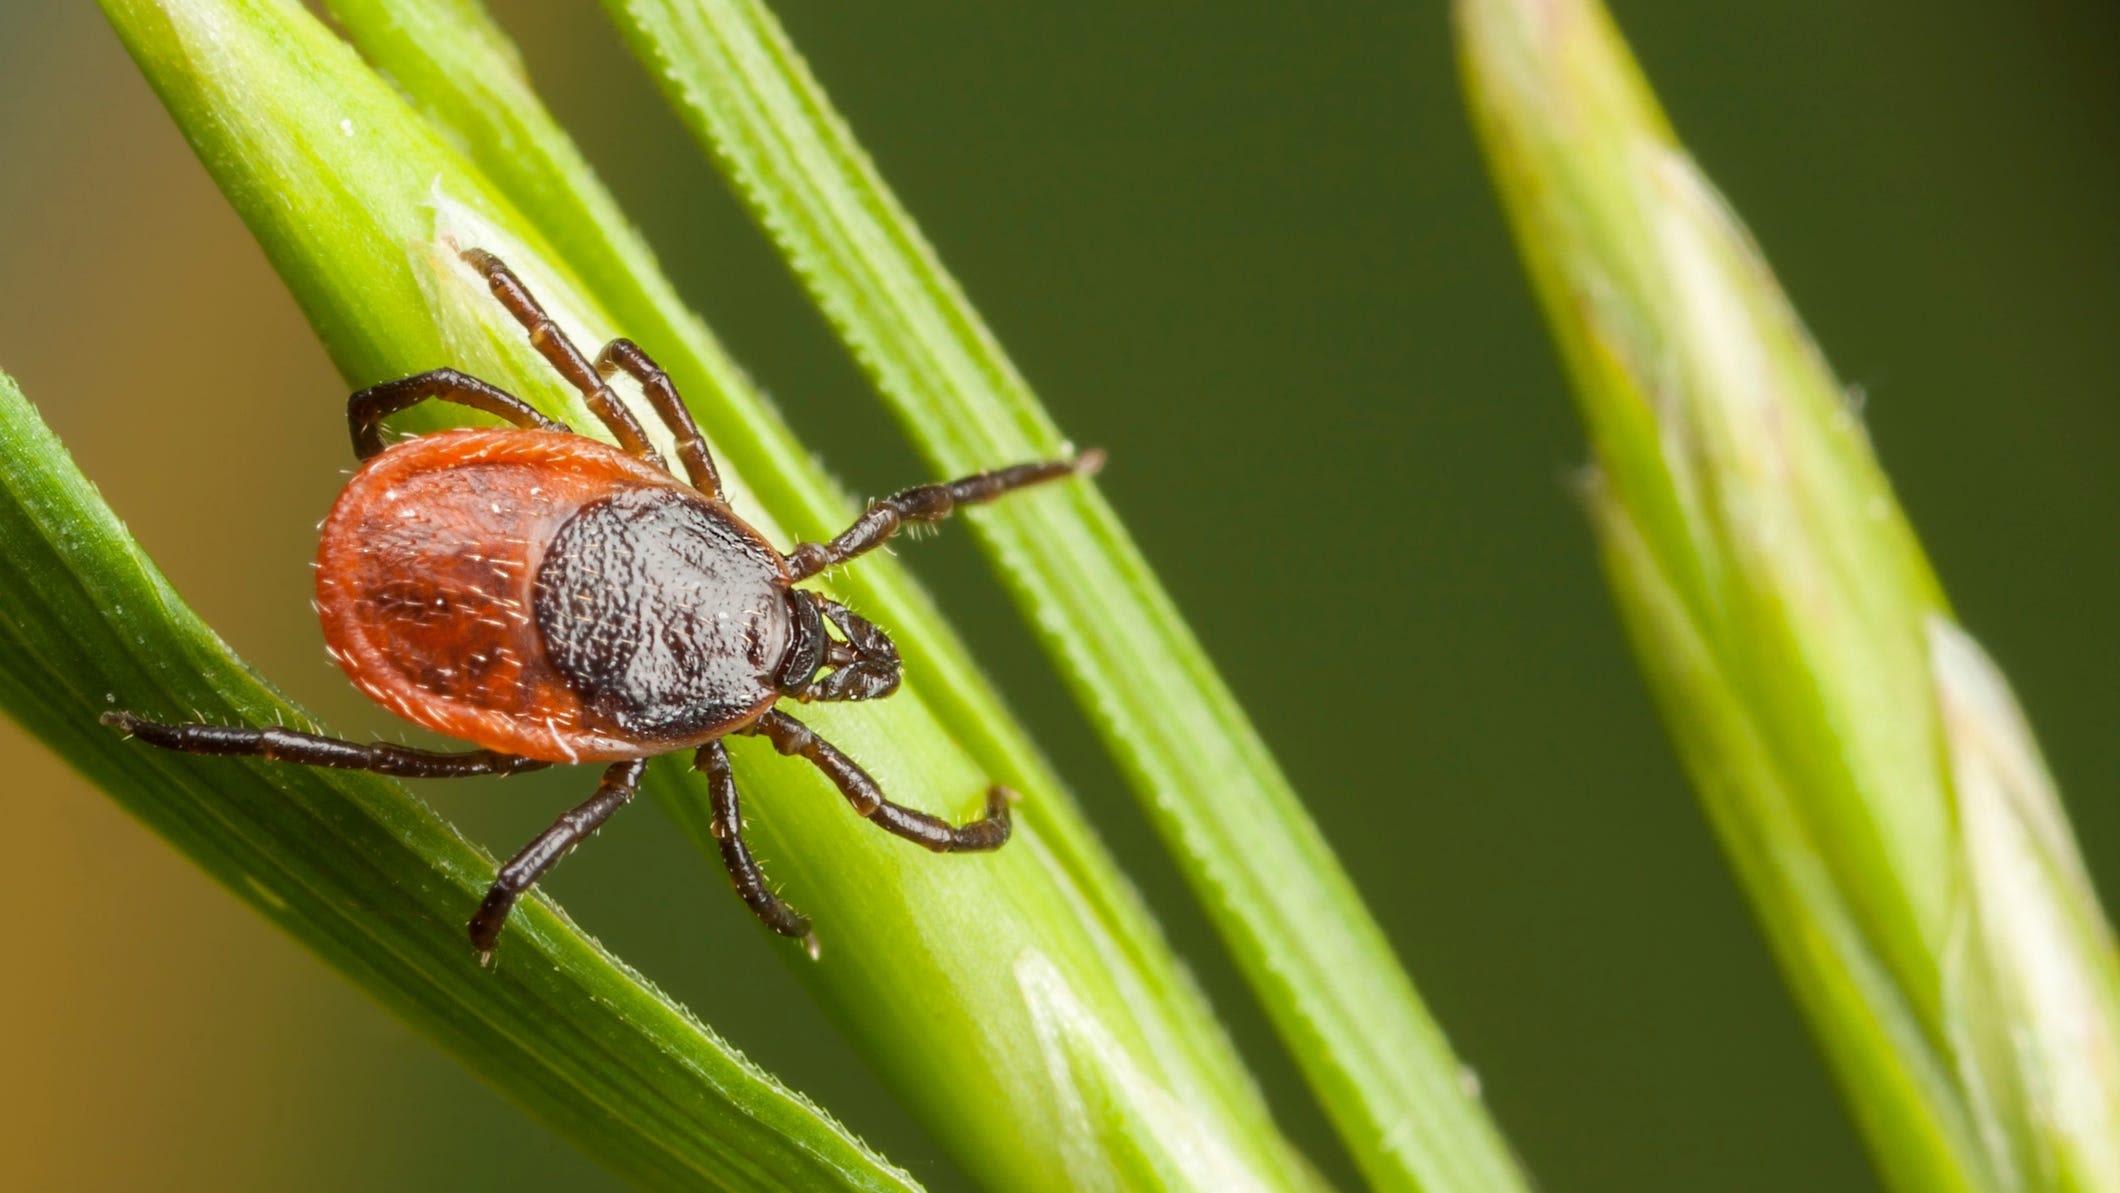 Is Lyme disease curable? Here's what you should know about tick bites and symptoms.